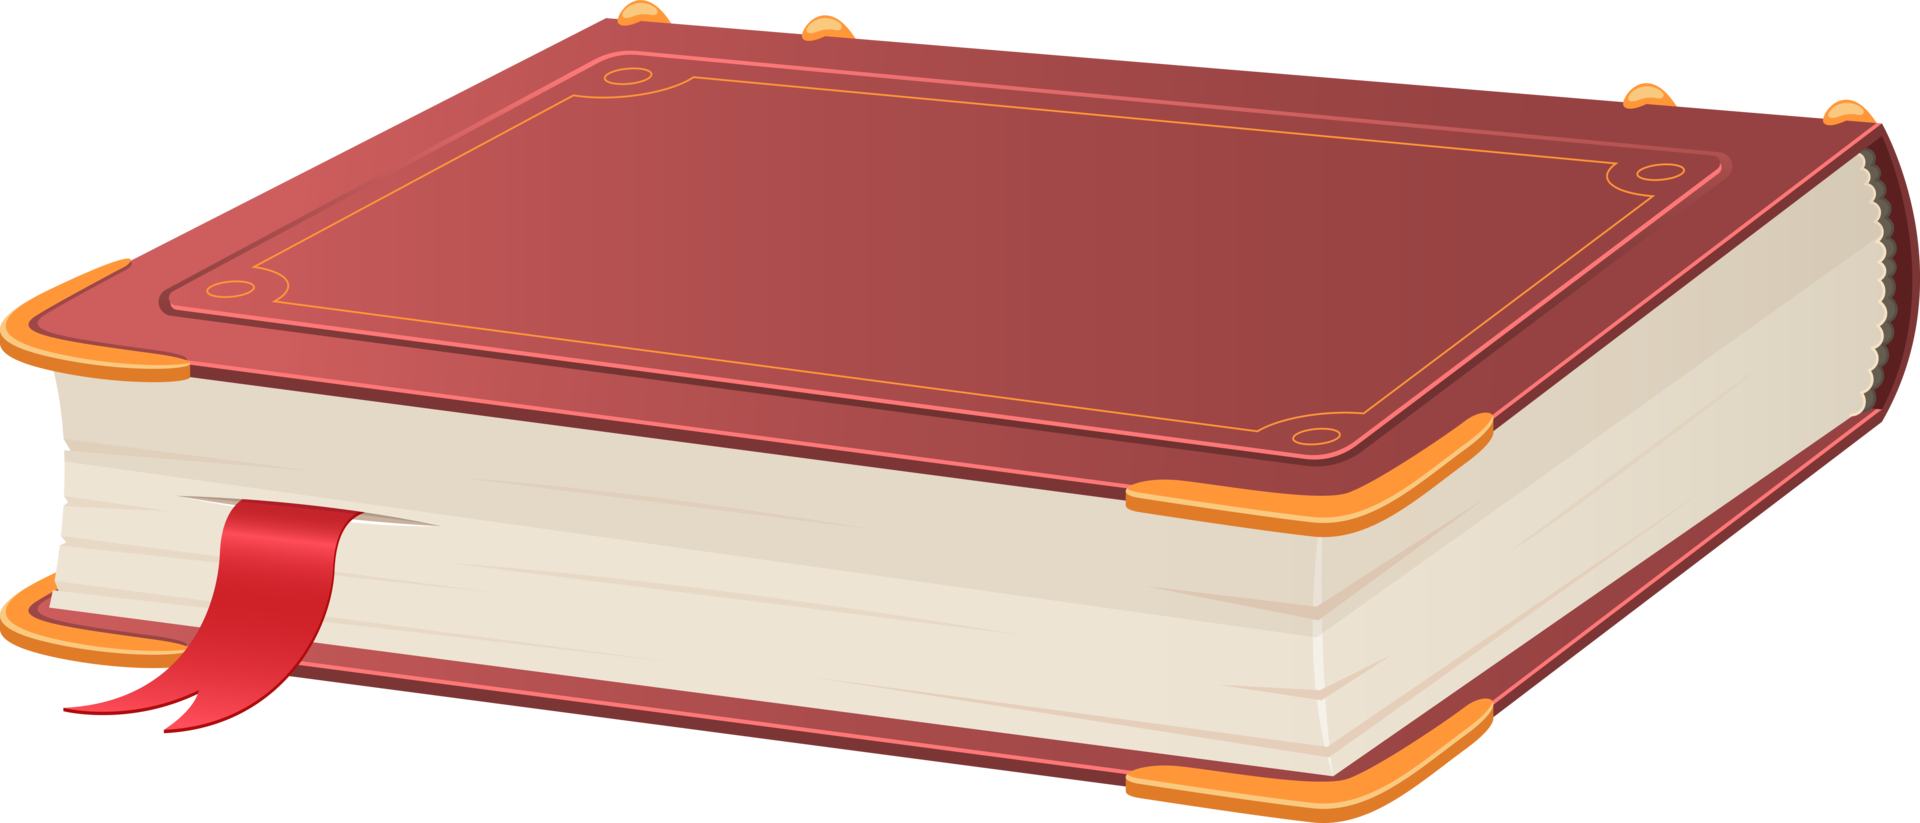 The history textbook in closed state, burgundy colored with a red ribbon.